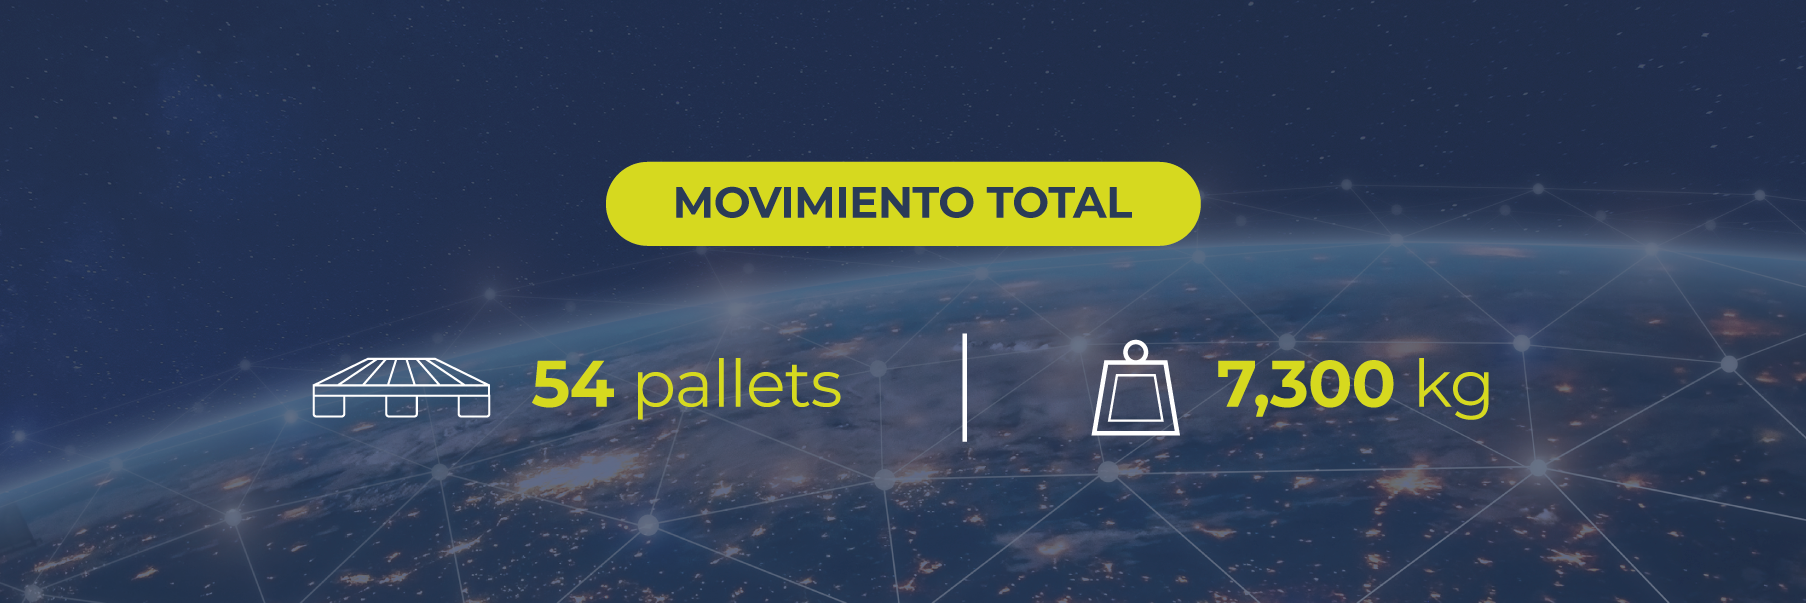 Movimiento total: 54 pallets!